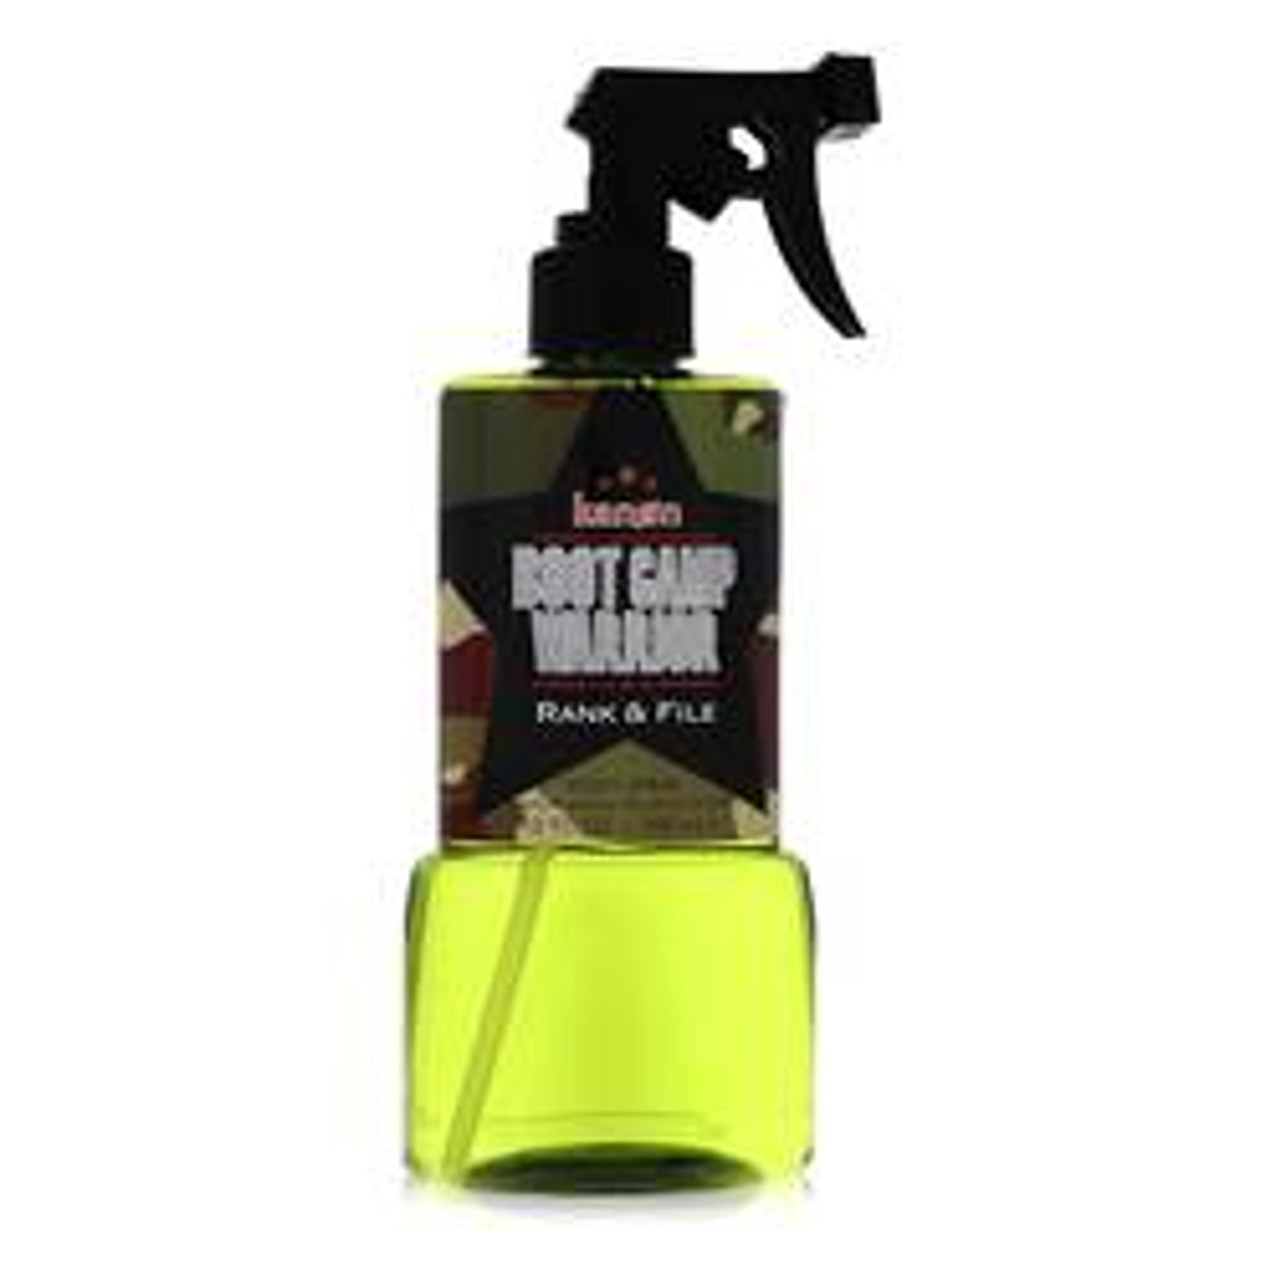 Kanon Boot Camp Warrior Rank & File Cologne By Kanon Body Spray 10 oz for Men - [From 27.00 - Choose pk Qty ] - *Ships from Miami